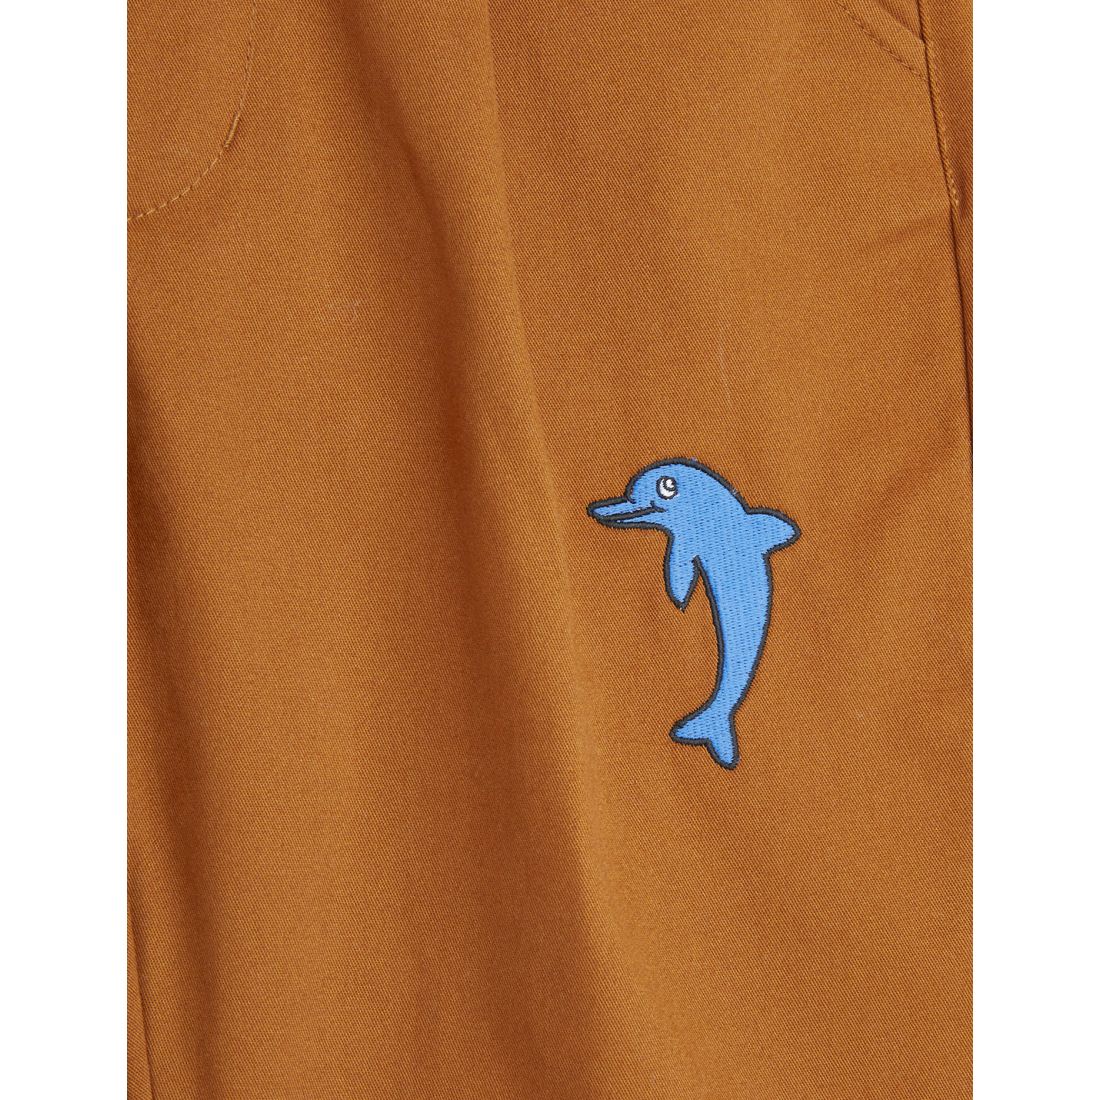 DOLPHIN EMBROIDERED CHINOS